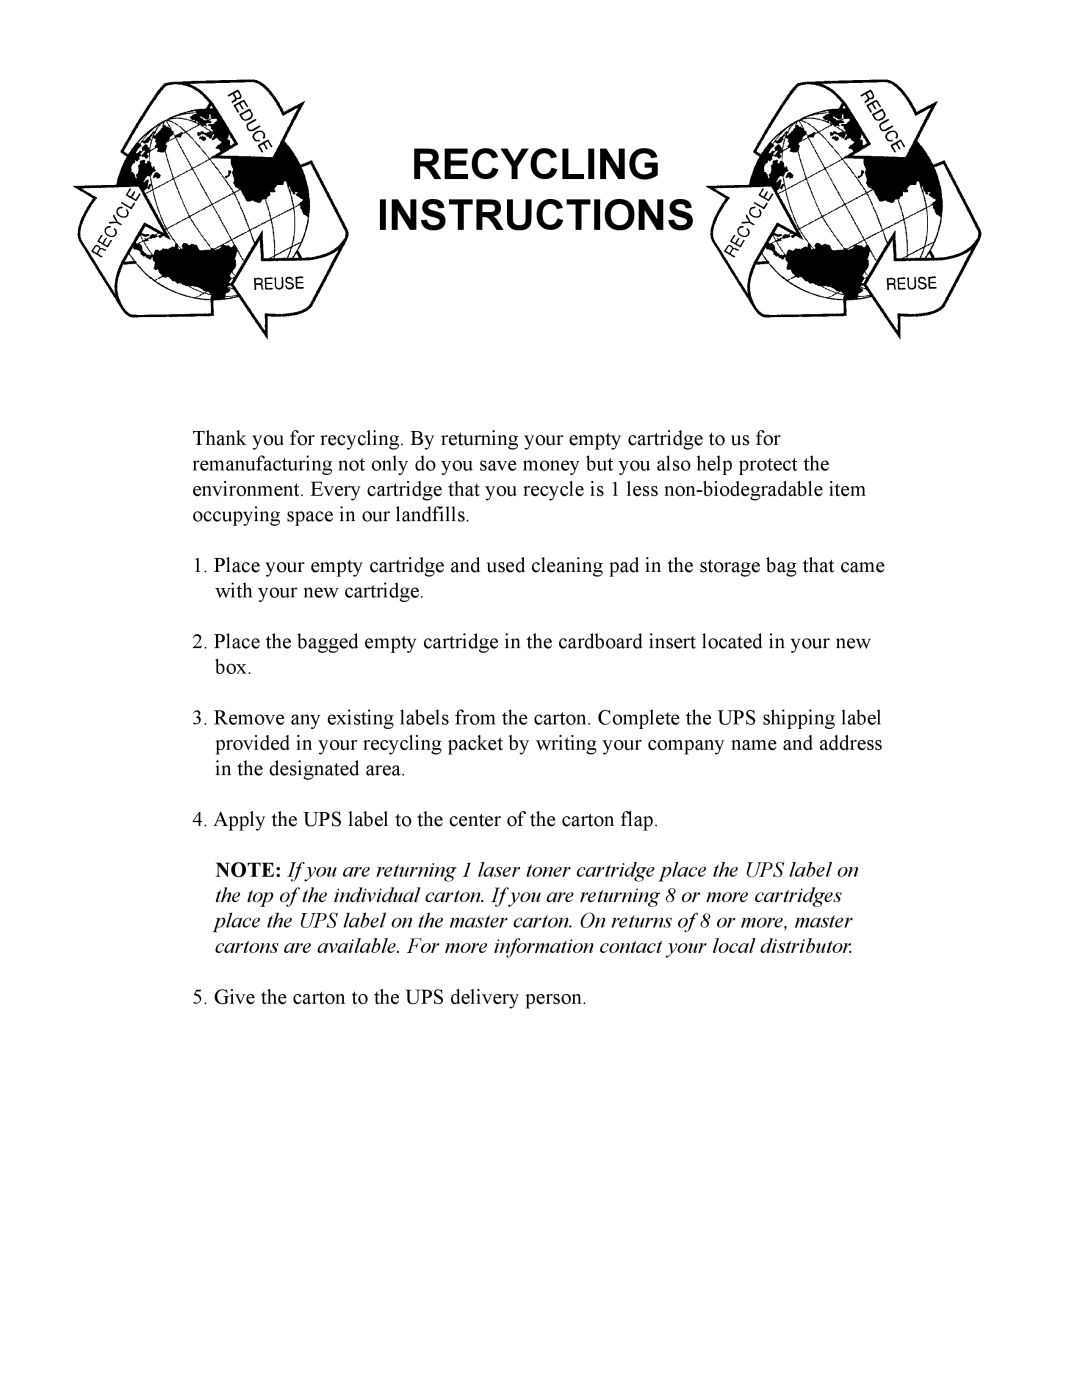 IBM 32 installation instructions Recycling Instructions 